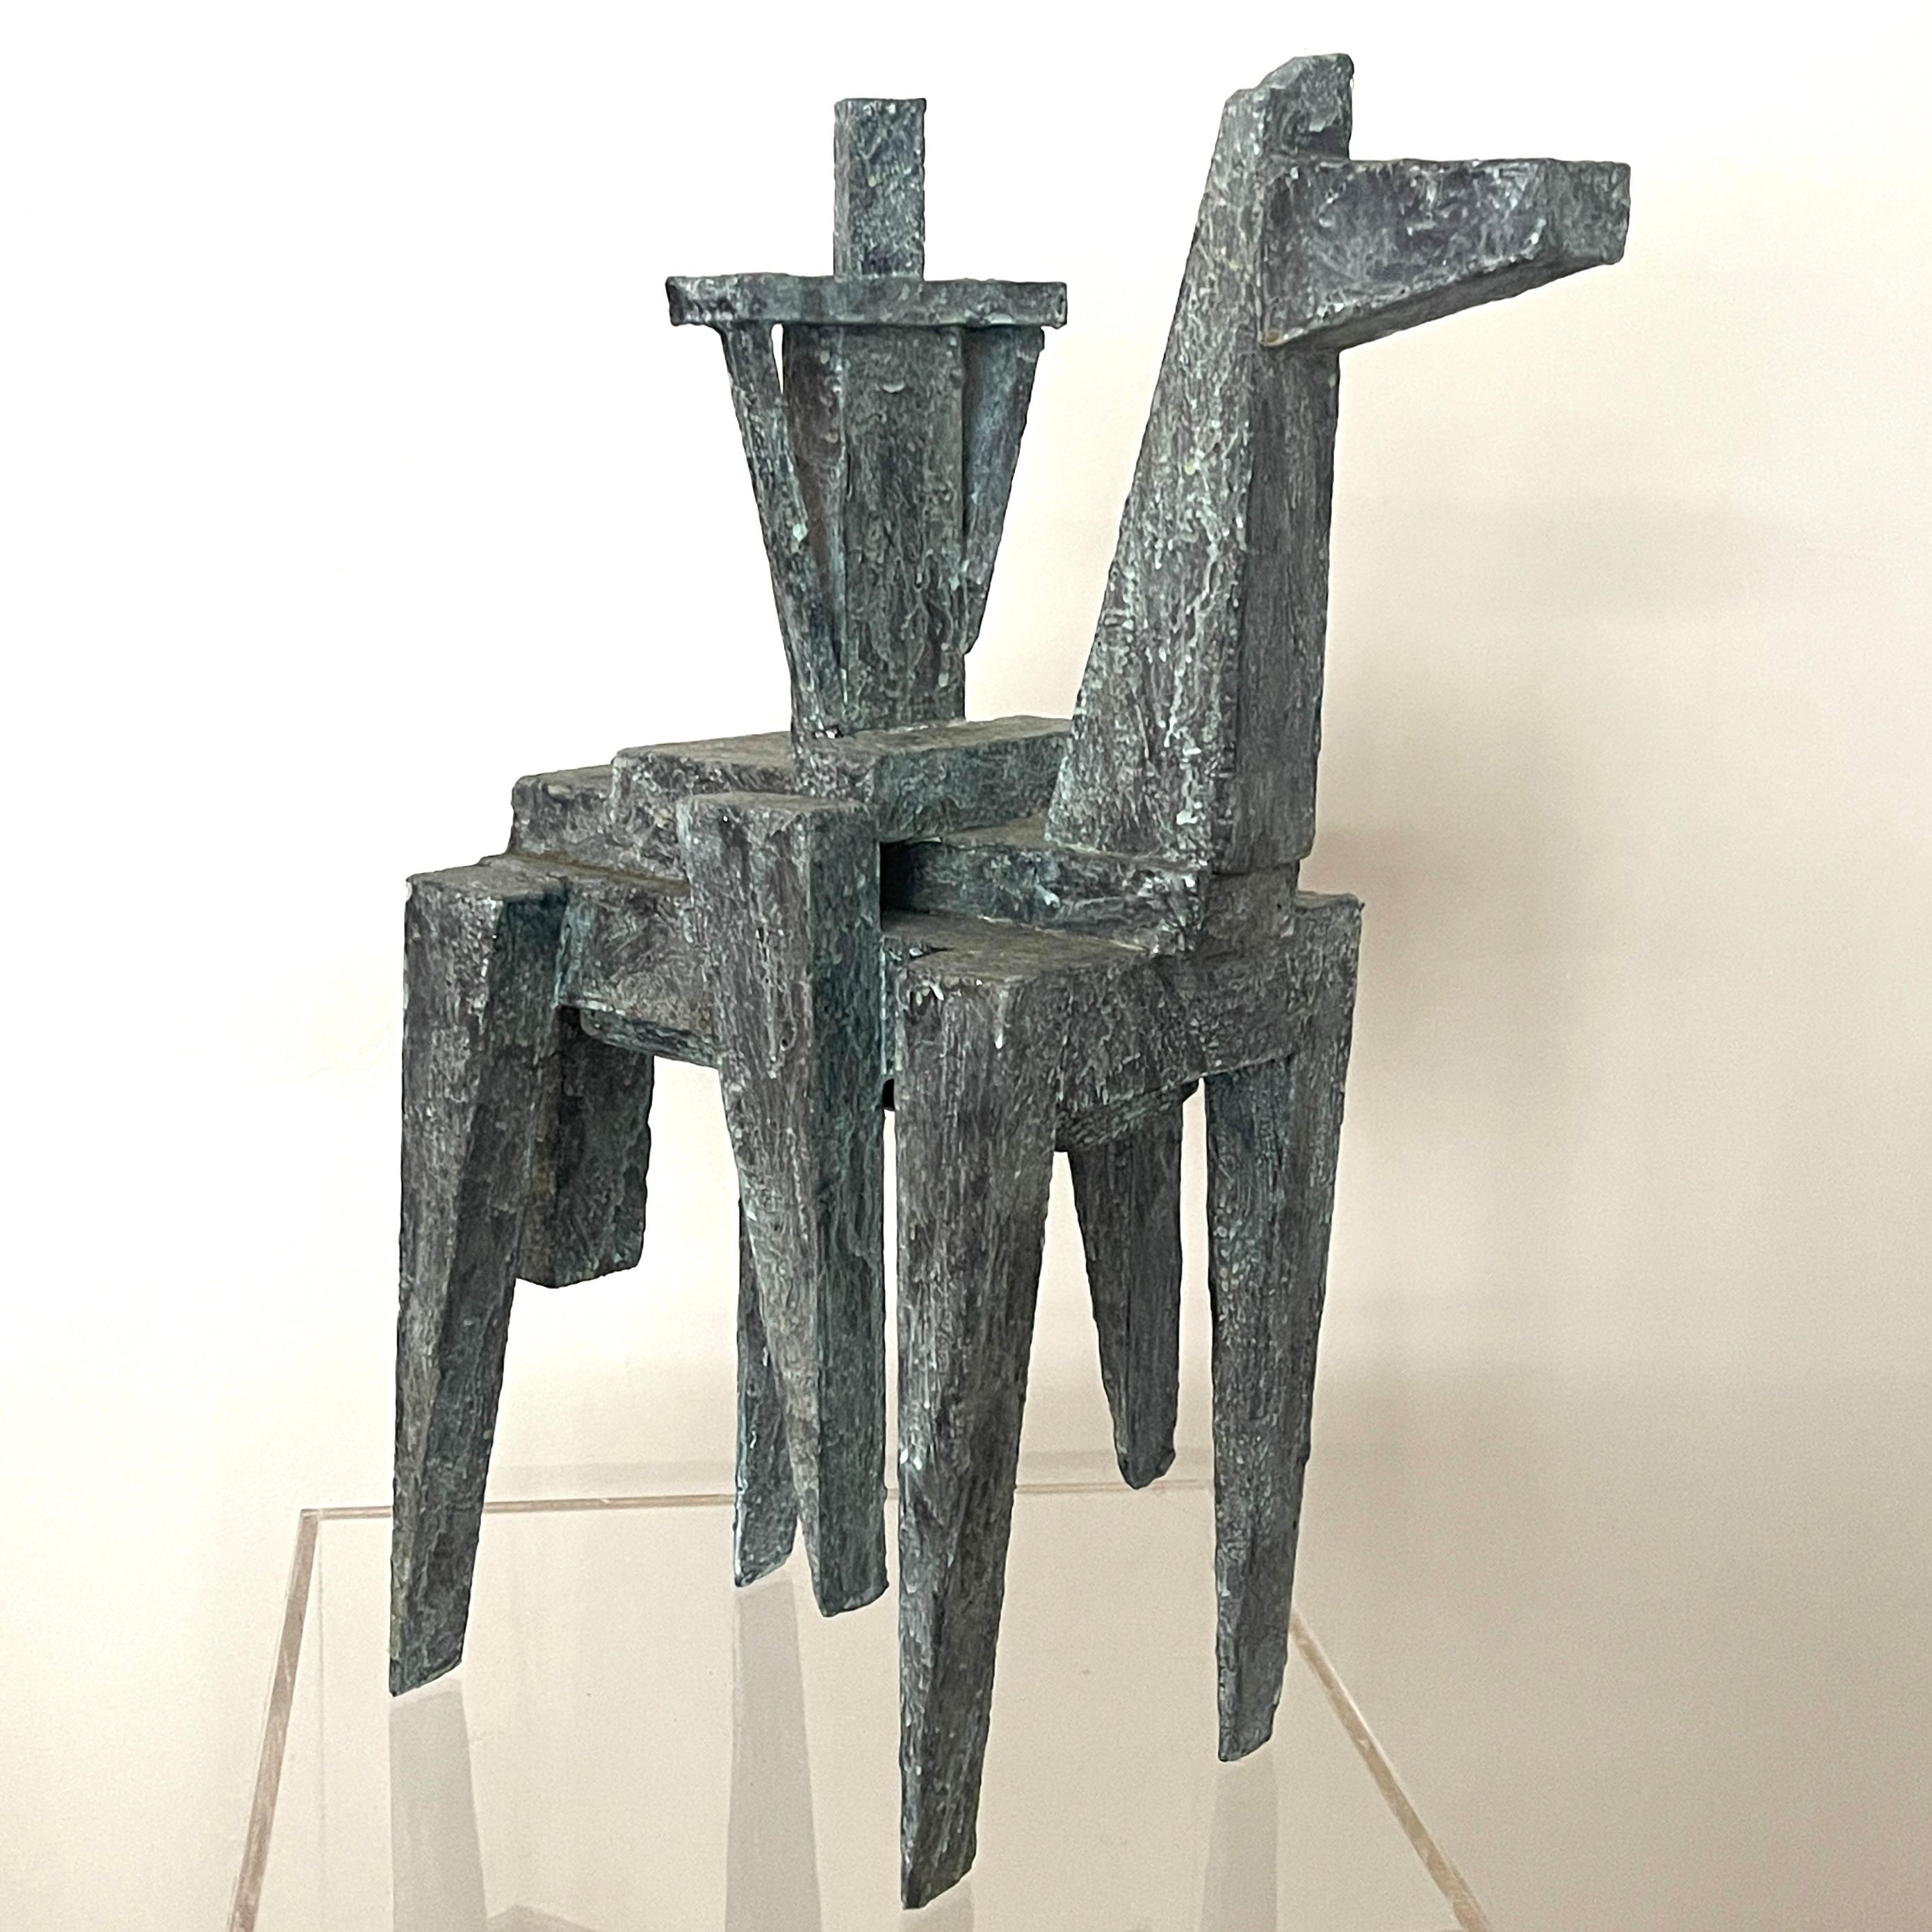 Modernist Cubist Sculpture by Bill Low with Weathered Bronze Finish For Sale 11